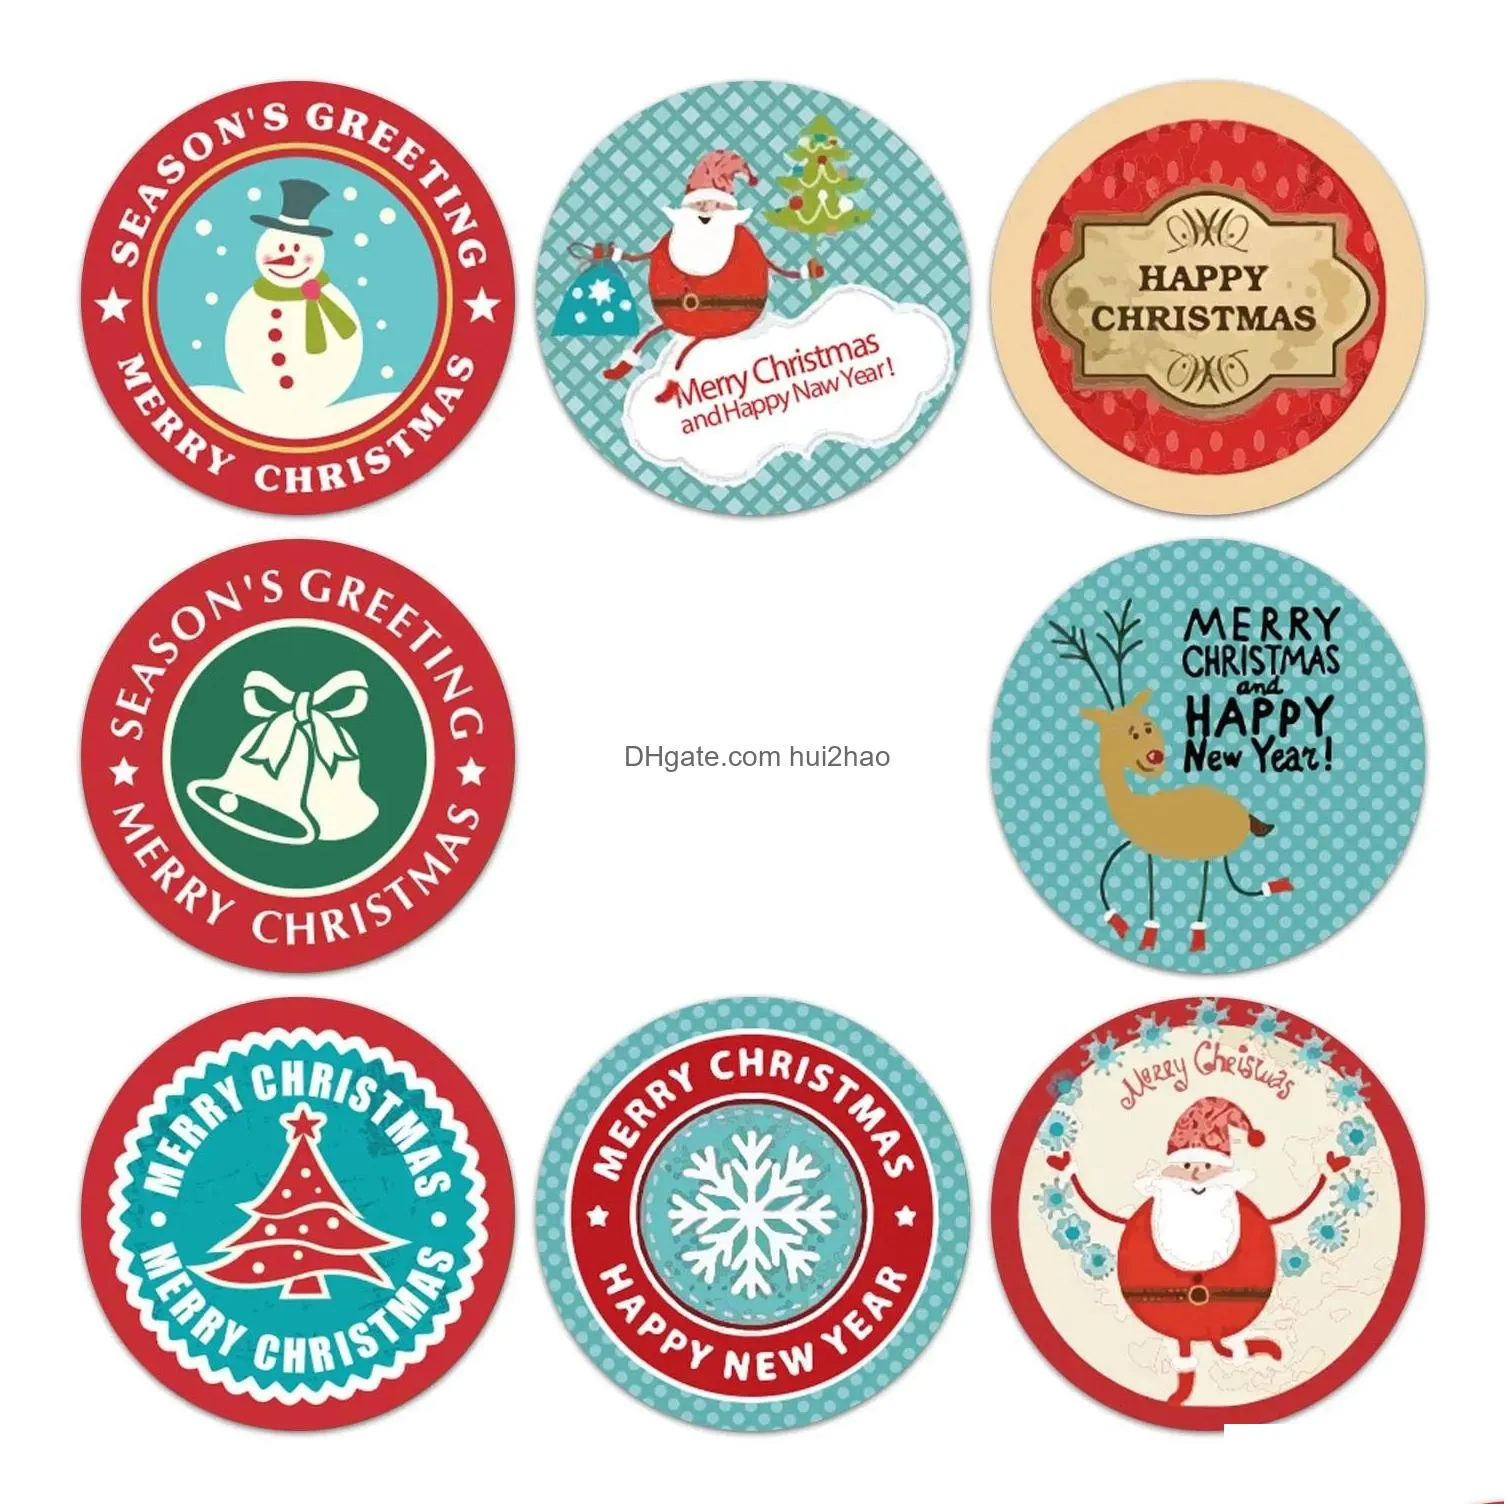 500pcs merry christmas theme seal labels stickers xmas tree elk snowflake candy baking bag package envelope gifts box sticker decorations year